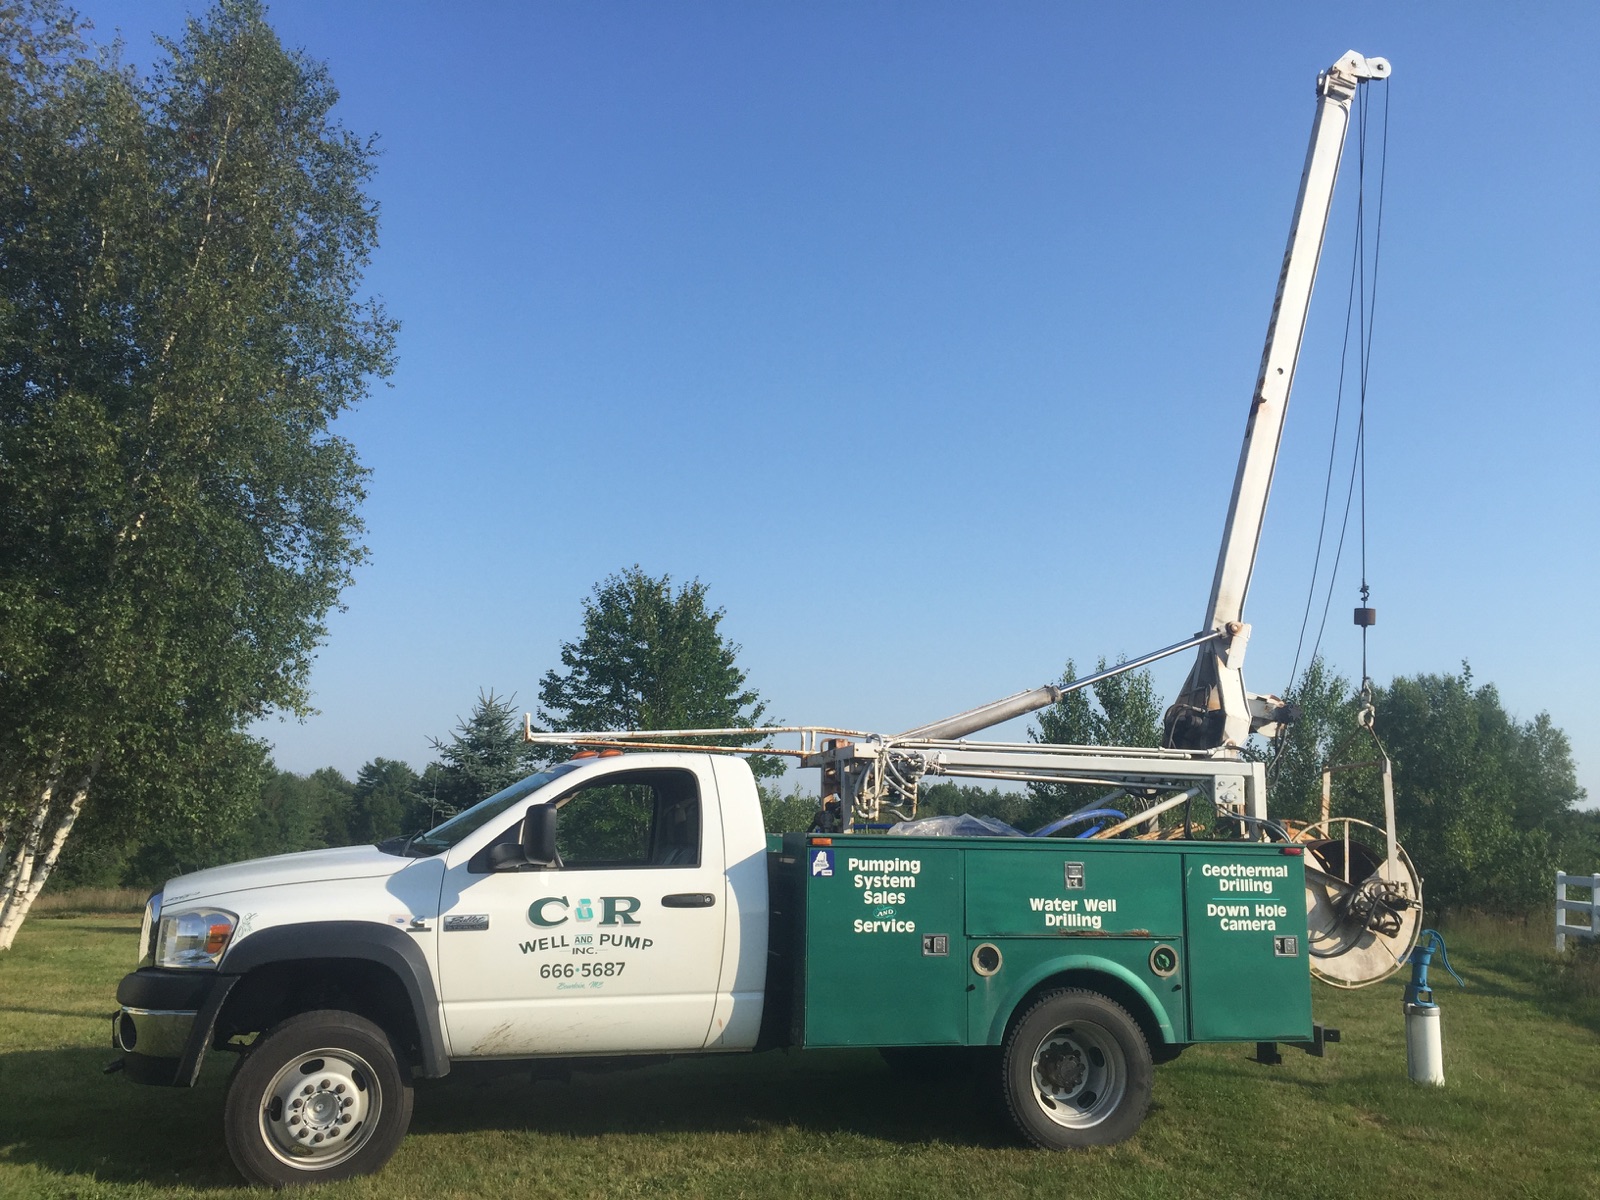 C&R Well and Pump, Inc., Specialists in drilled water wells and submersible pump systems, Bowdoin, Maine